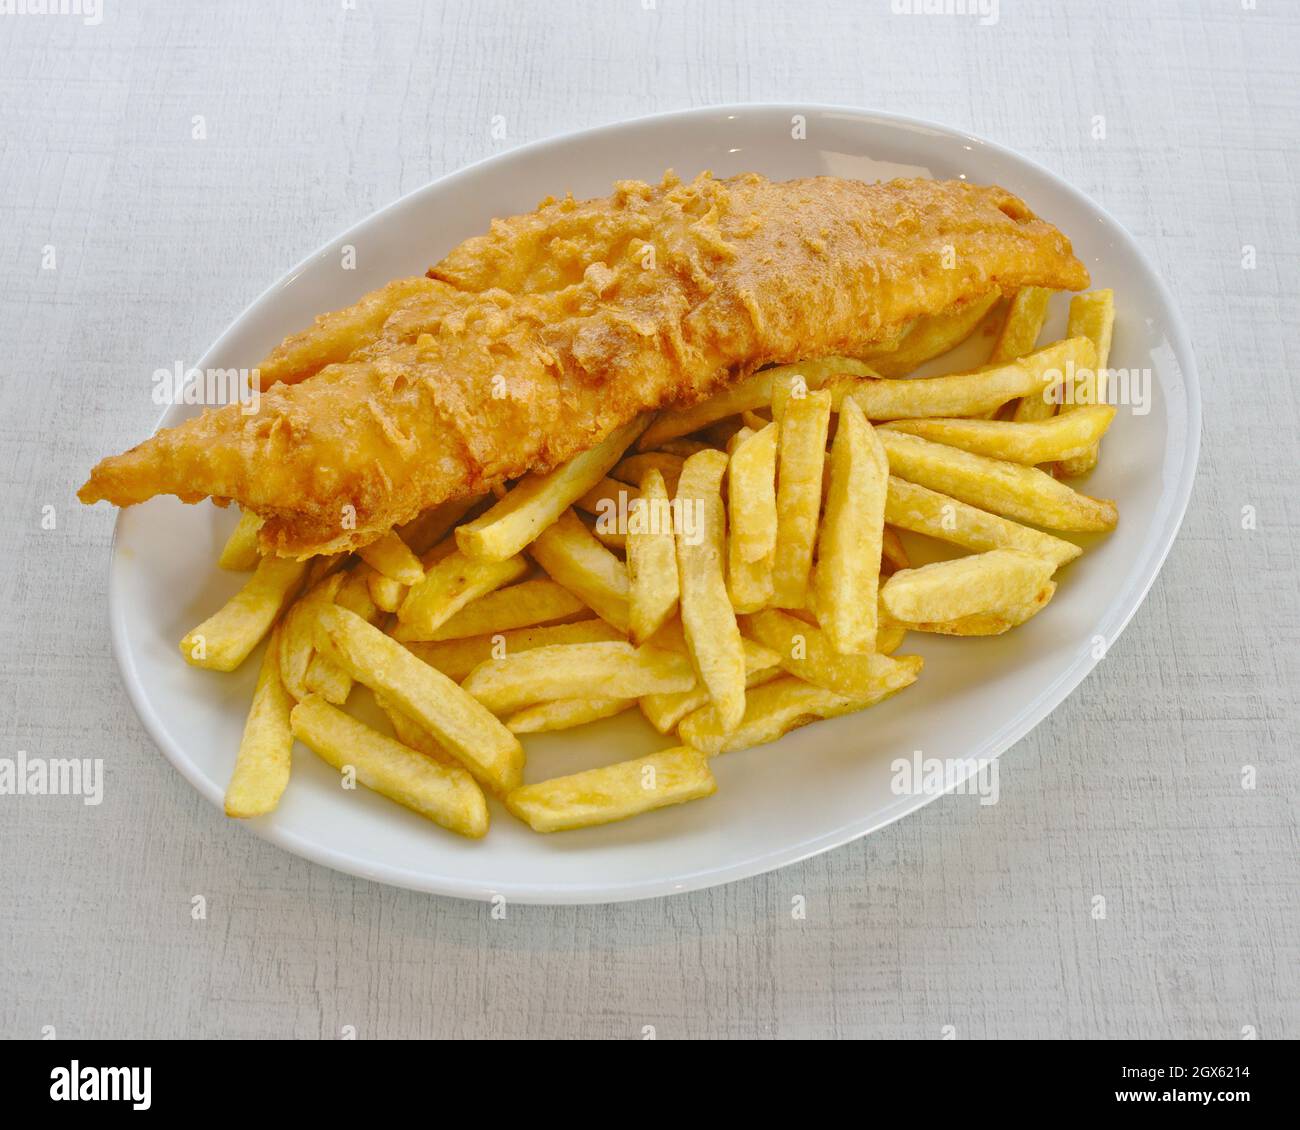 A plate of battered cod and chips Stock Photo